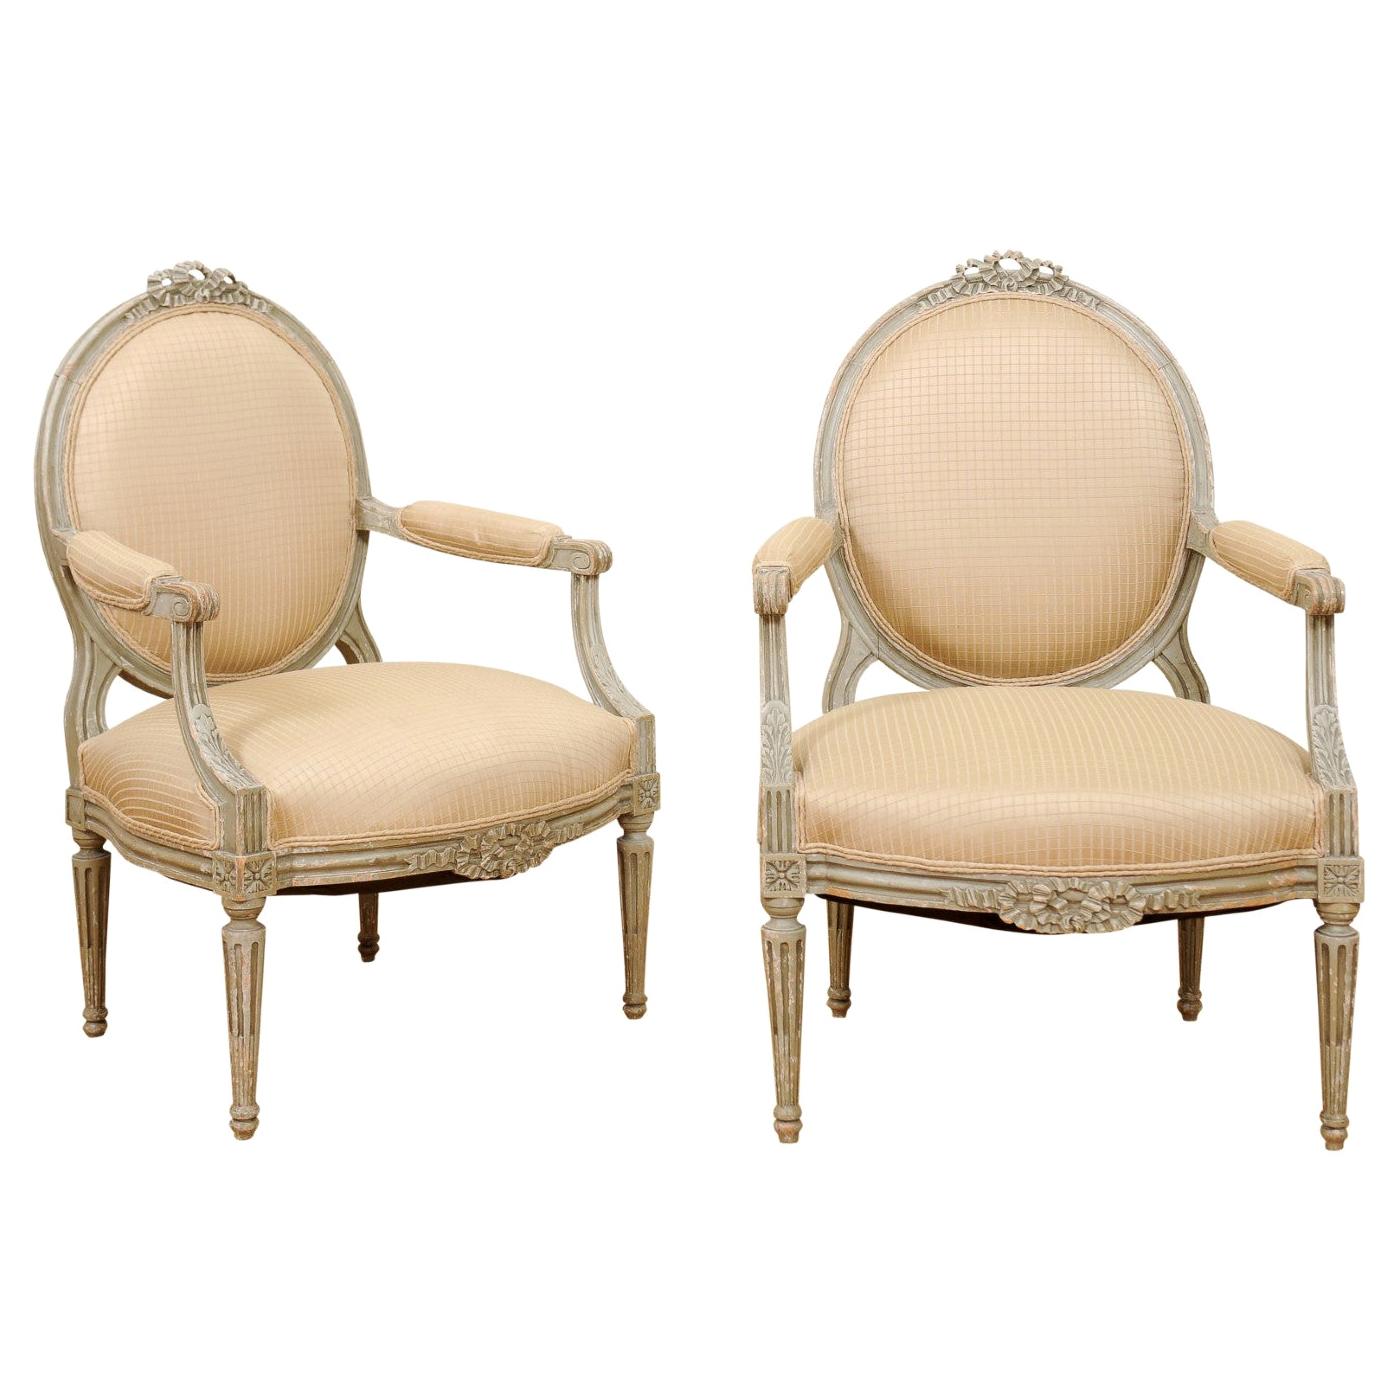 Pair of French Louis XVI Style 1850s Oval Back Armchairs with Carved Ribbons